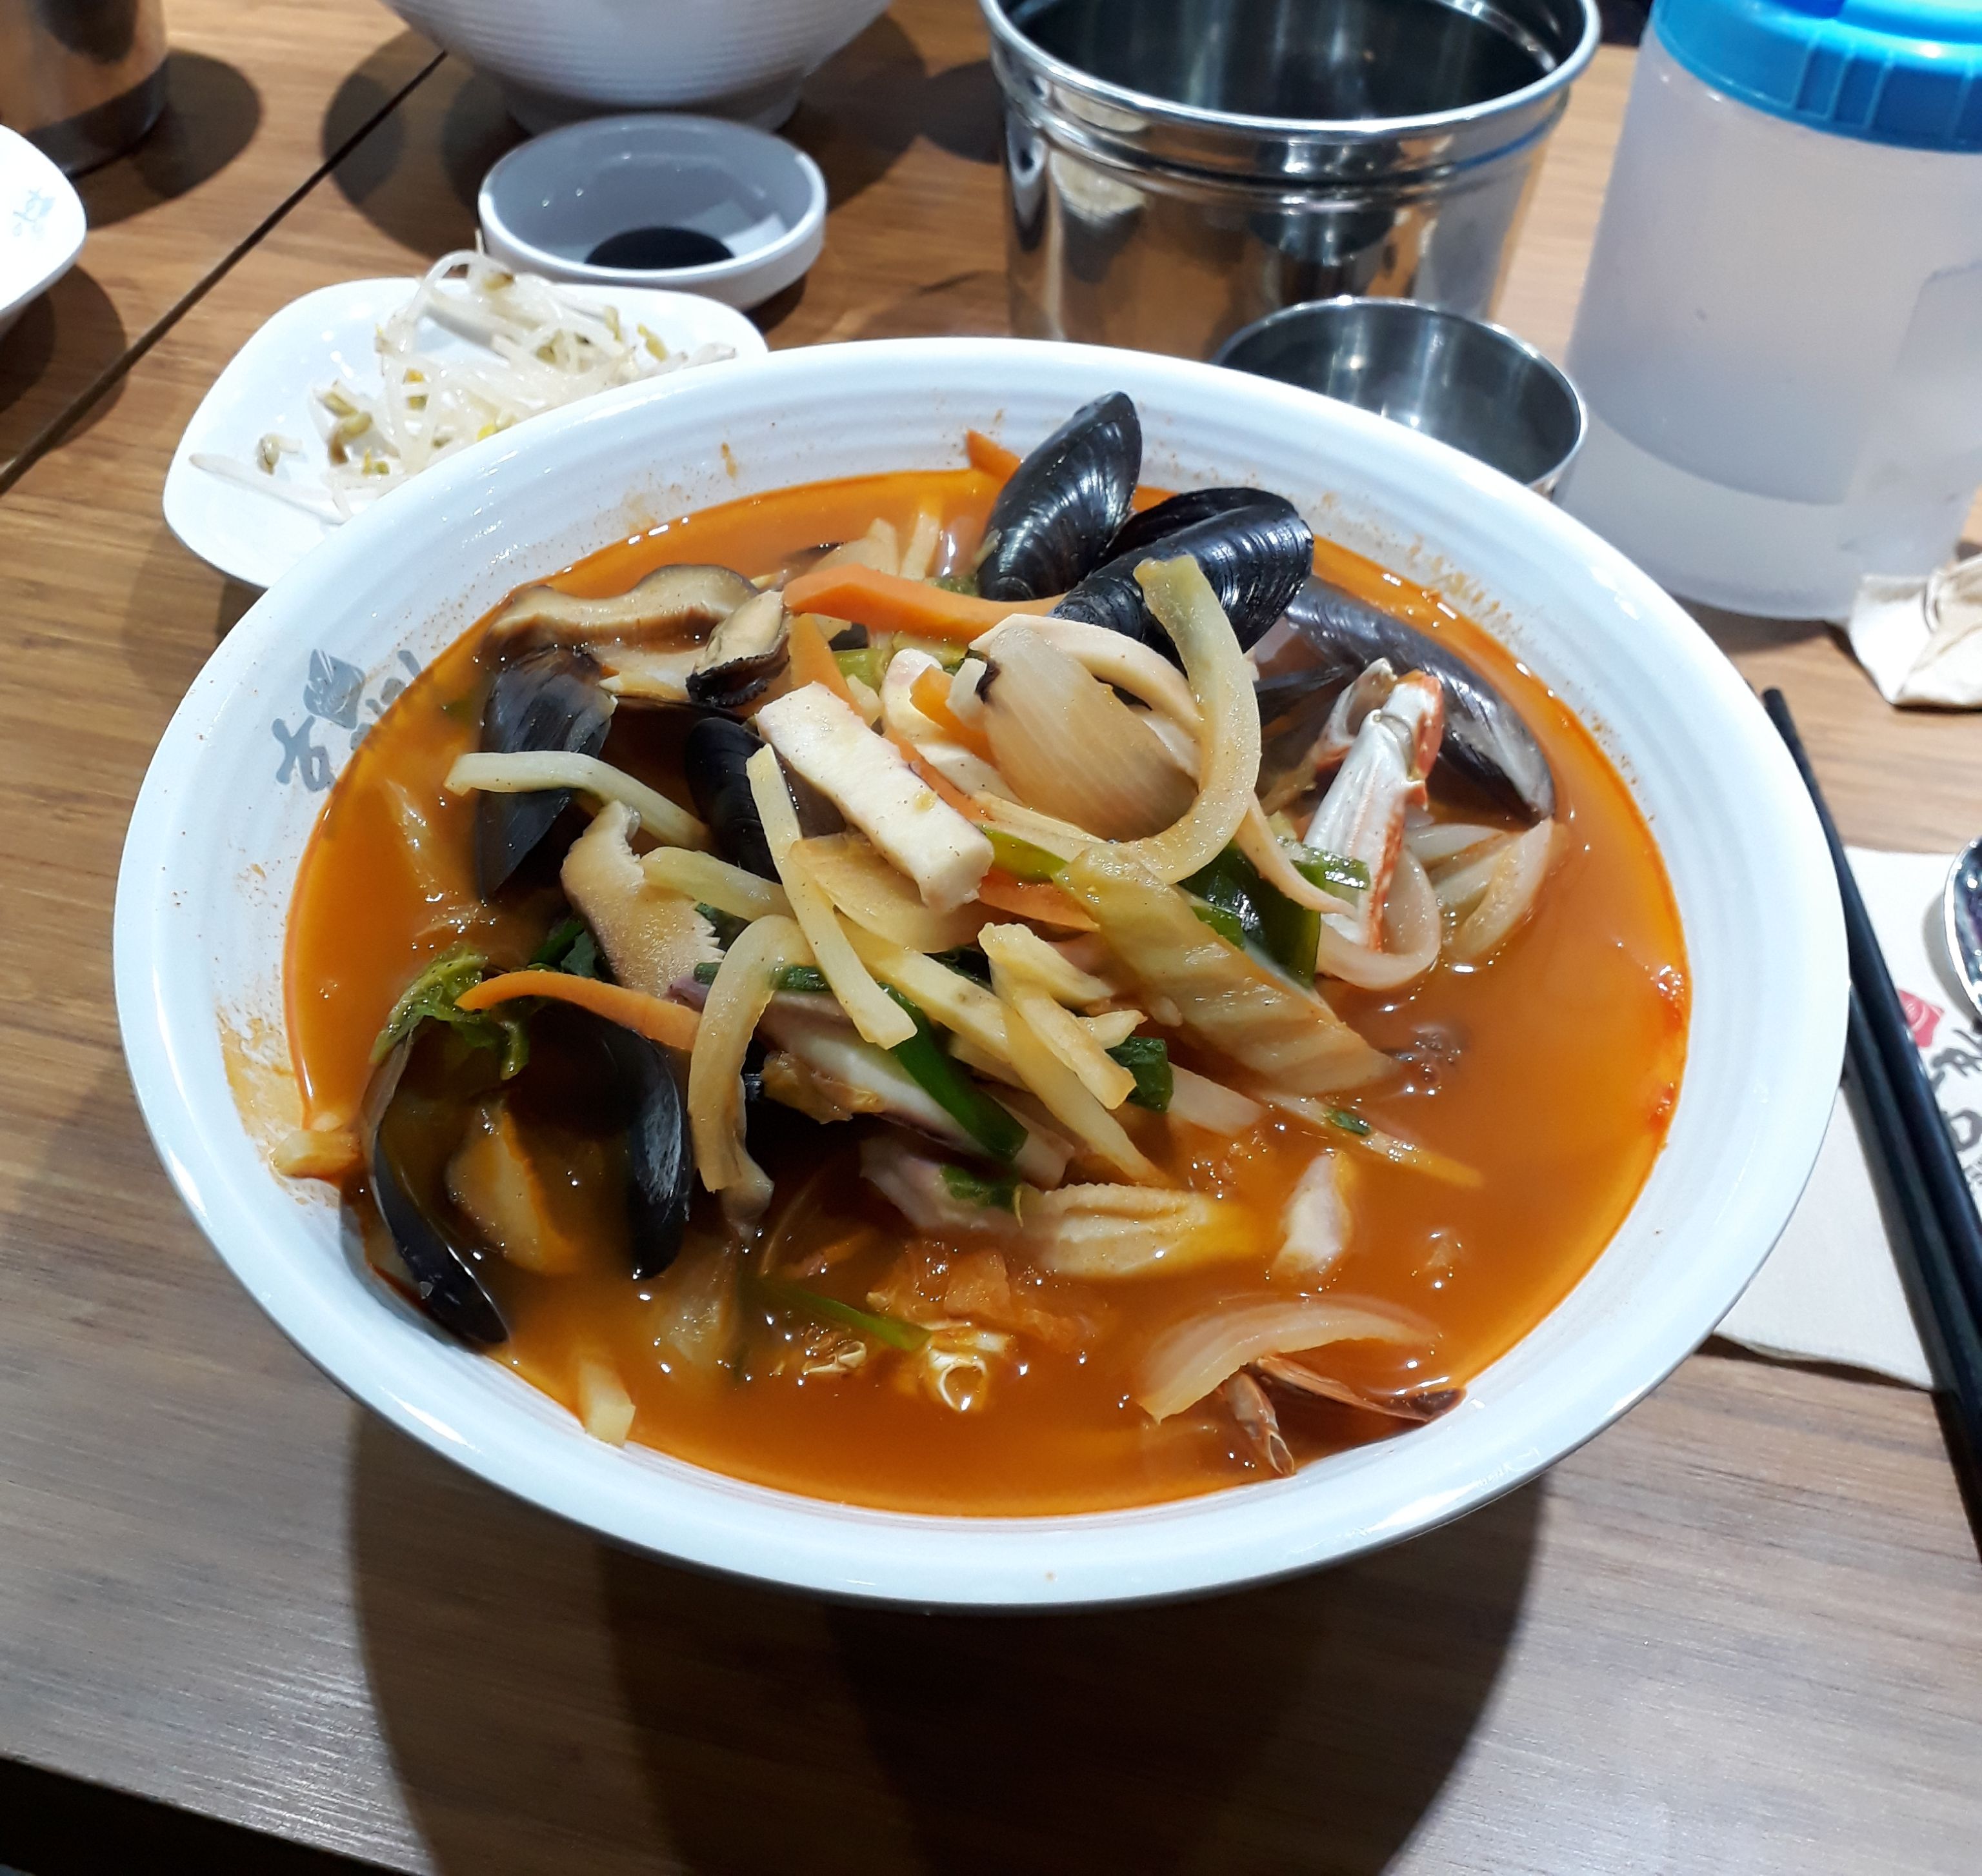 Spicy Korean Seafood Soup Jjampong Or Champong ì§¬ë½• Mixed Up Noodles Meat Seafood And Vegetables Soup With Spicy Taste Steemit